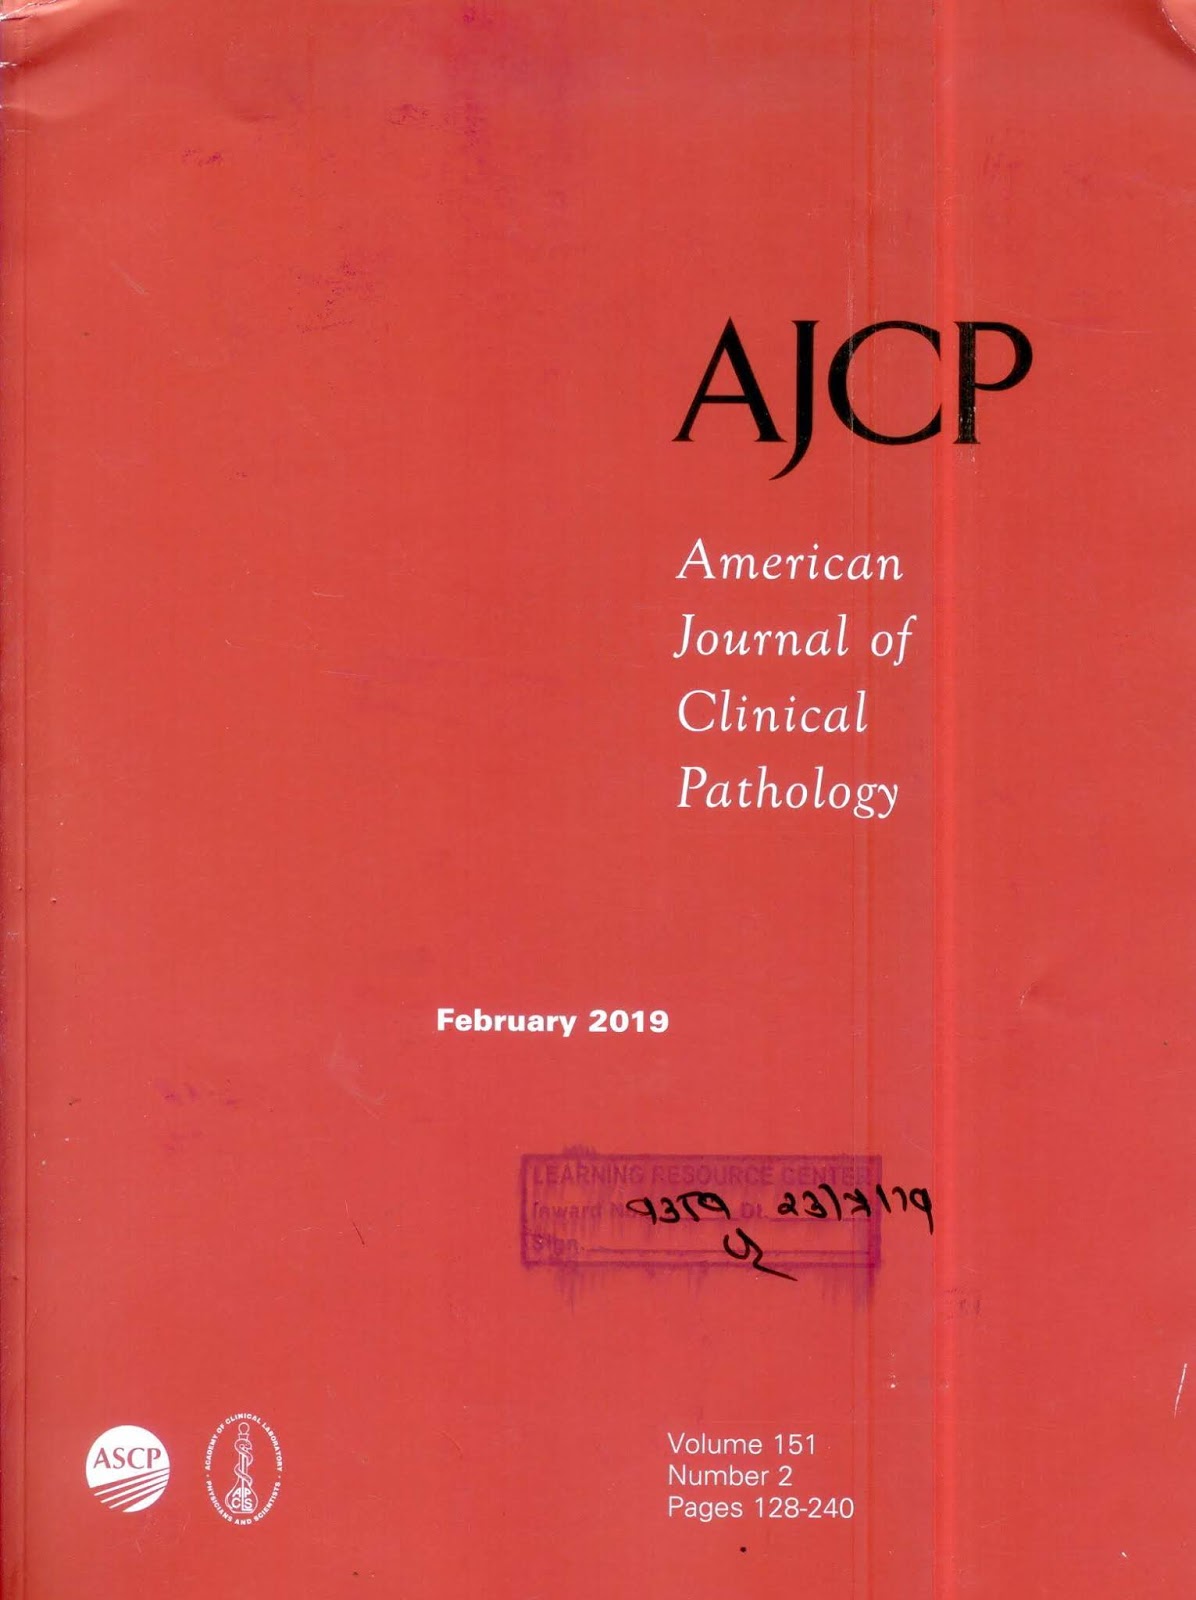 https://academic.oup.com/ajcp/issue/151/2